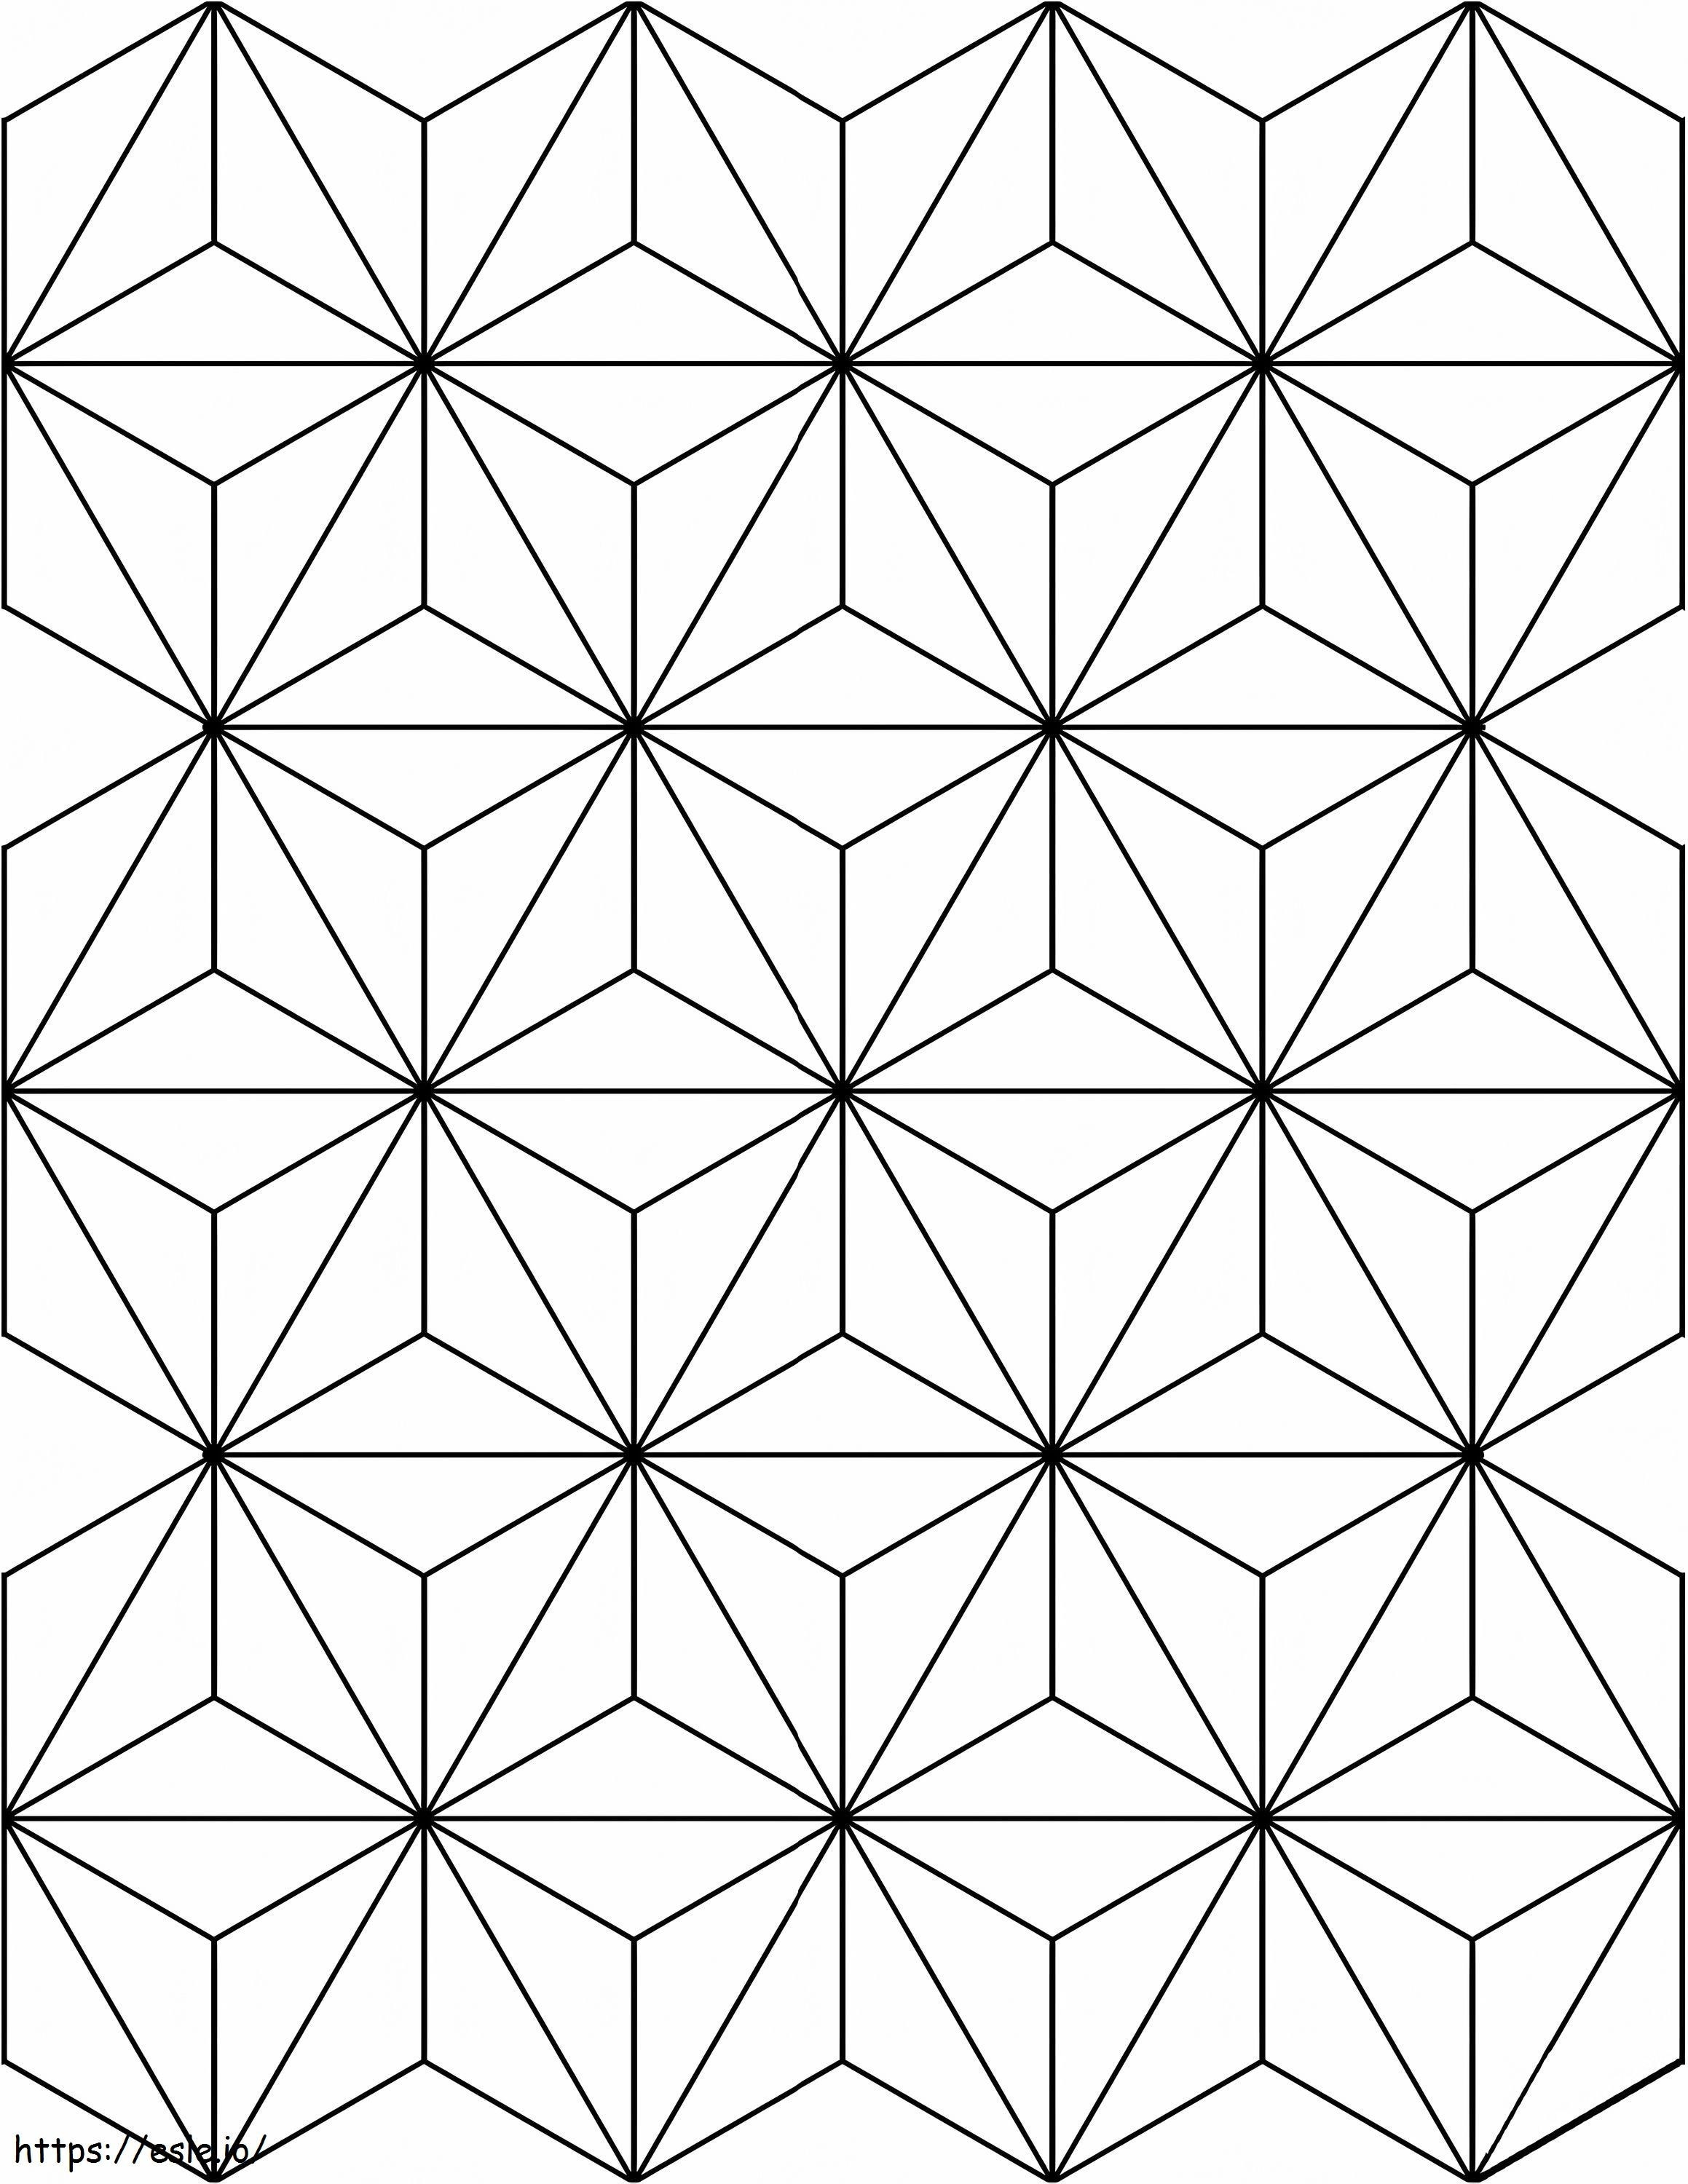 Asanoha Pattern coloring page